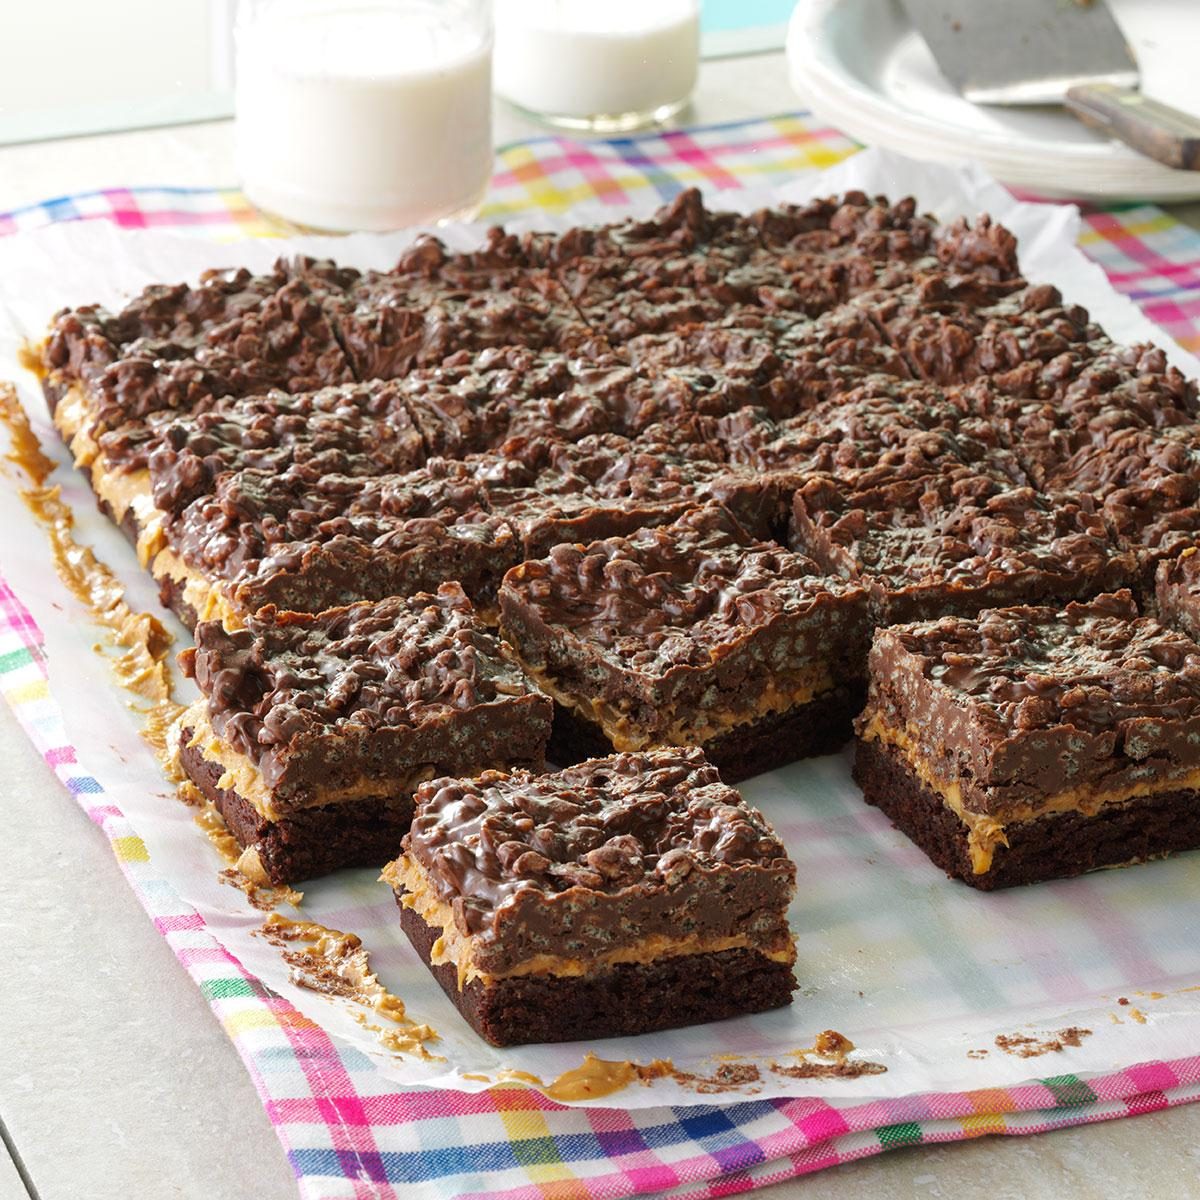 What is the best simple peanut butter brownie recipe?